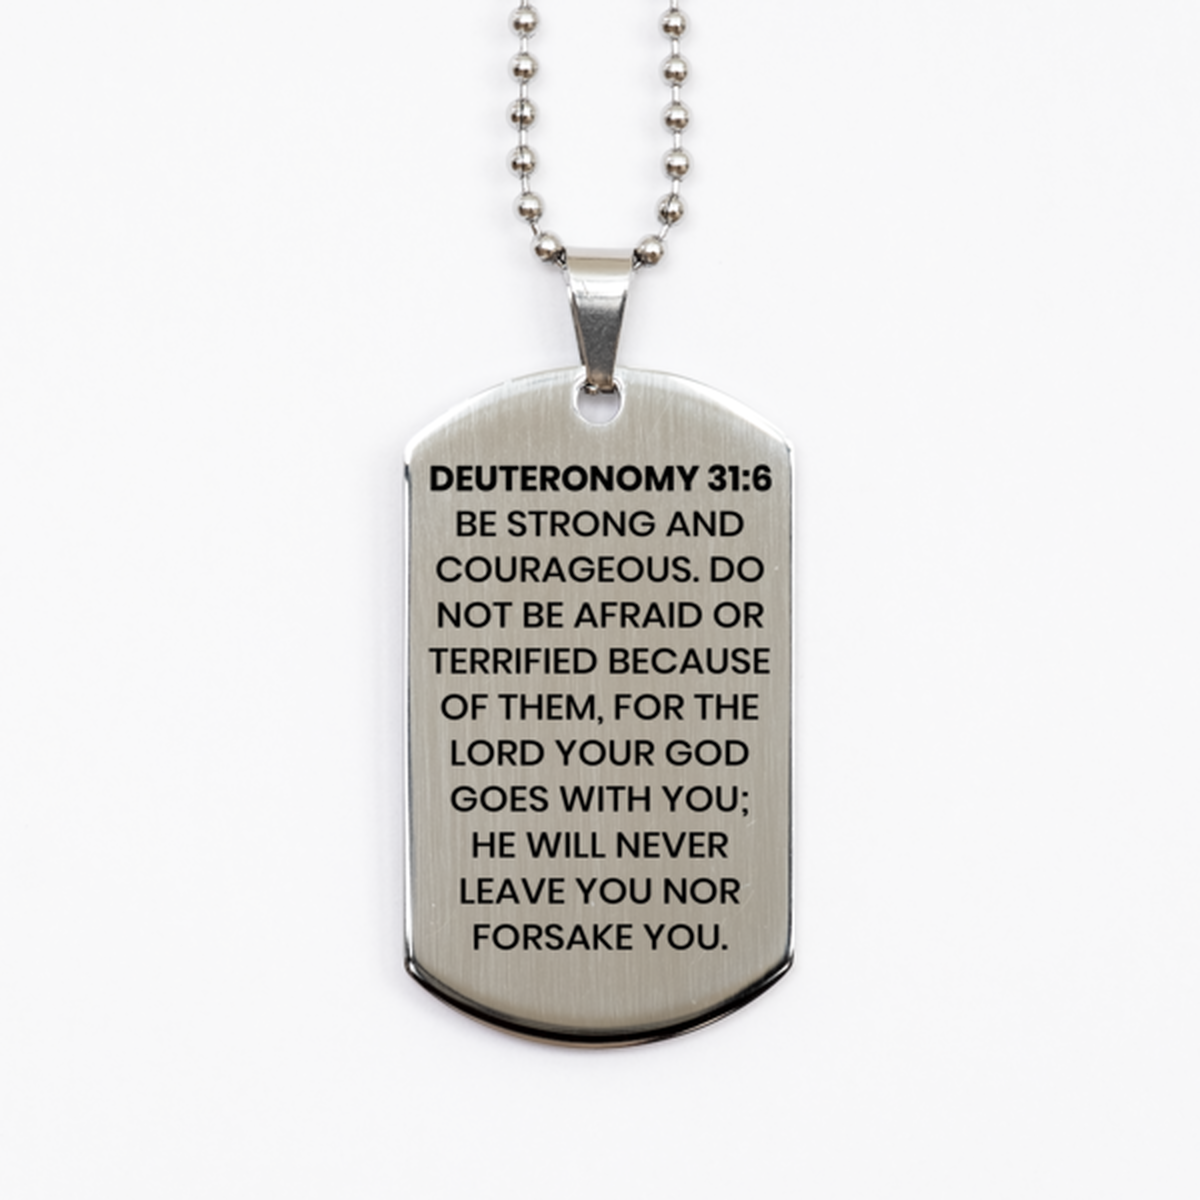 Deuteronomy 31:6 Necklace, Bible Verse Necklace, Christian Necklace, Christian Birthday Gift, Stainless Steel Dog Tag Necklace, Gift for Christian.